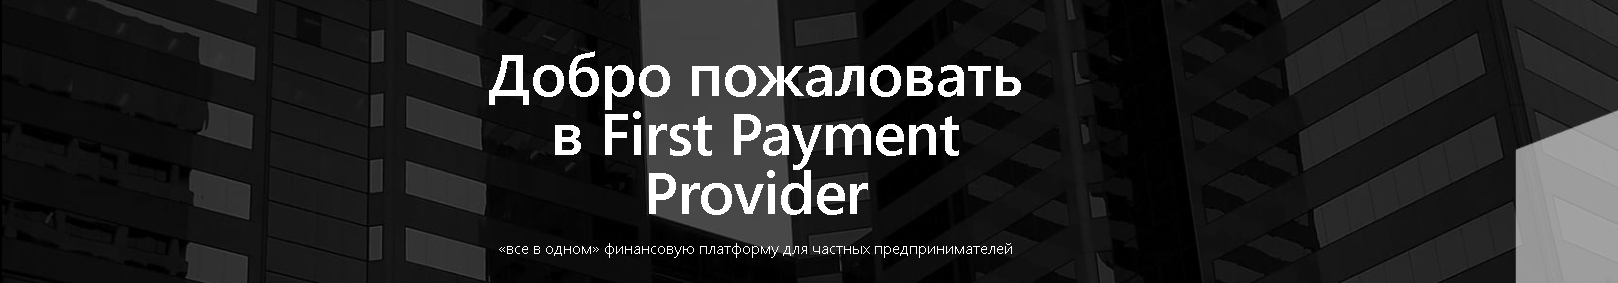 First Payment Provider RU's profile banner